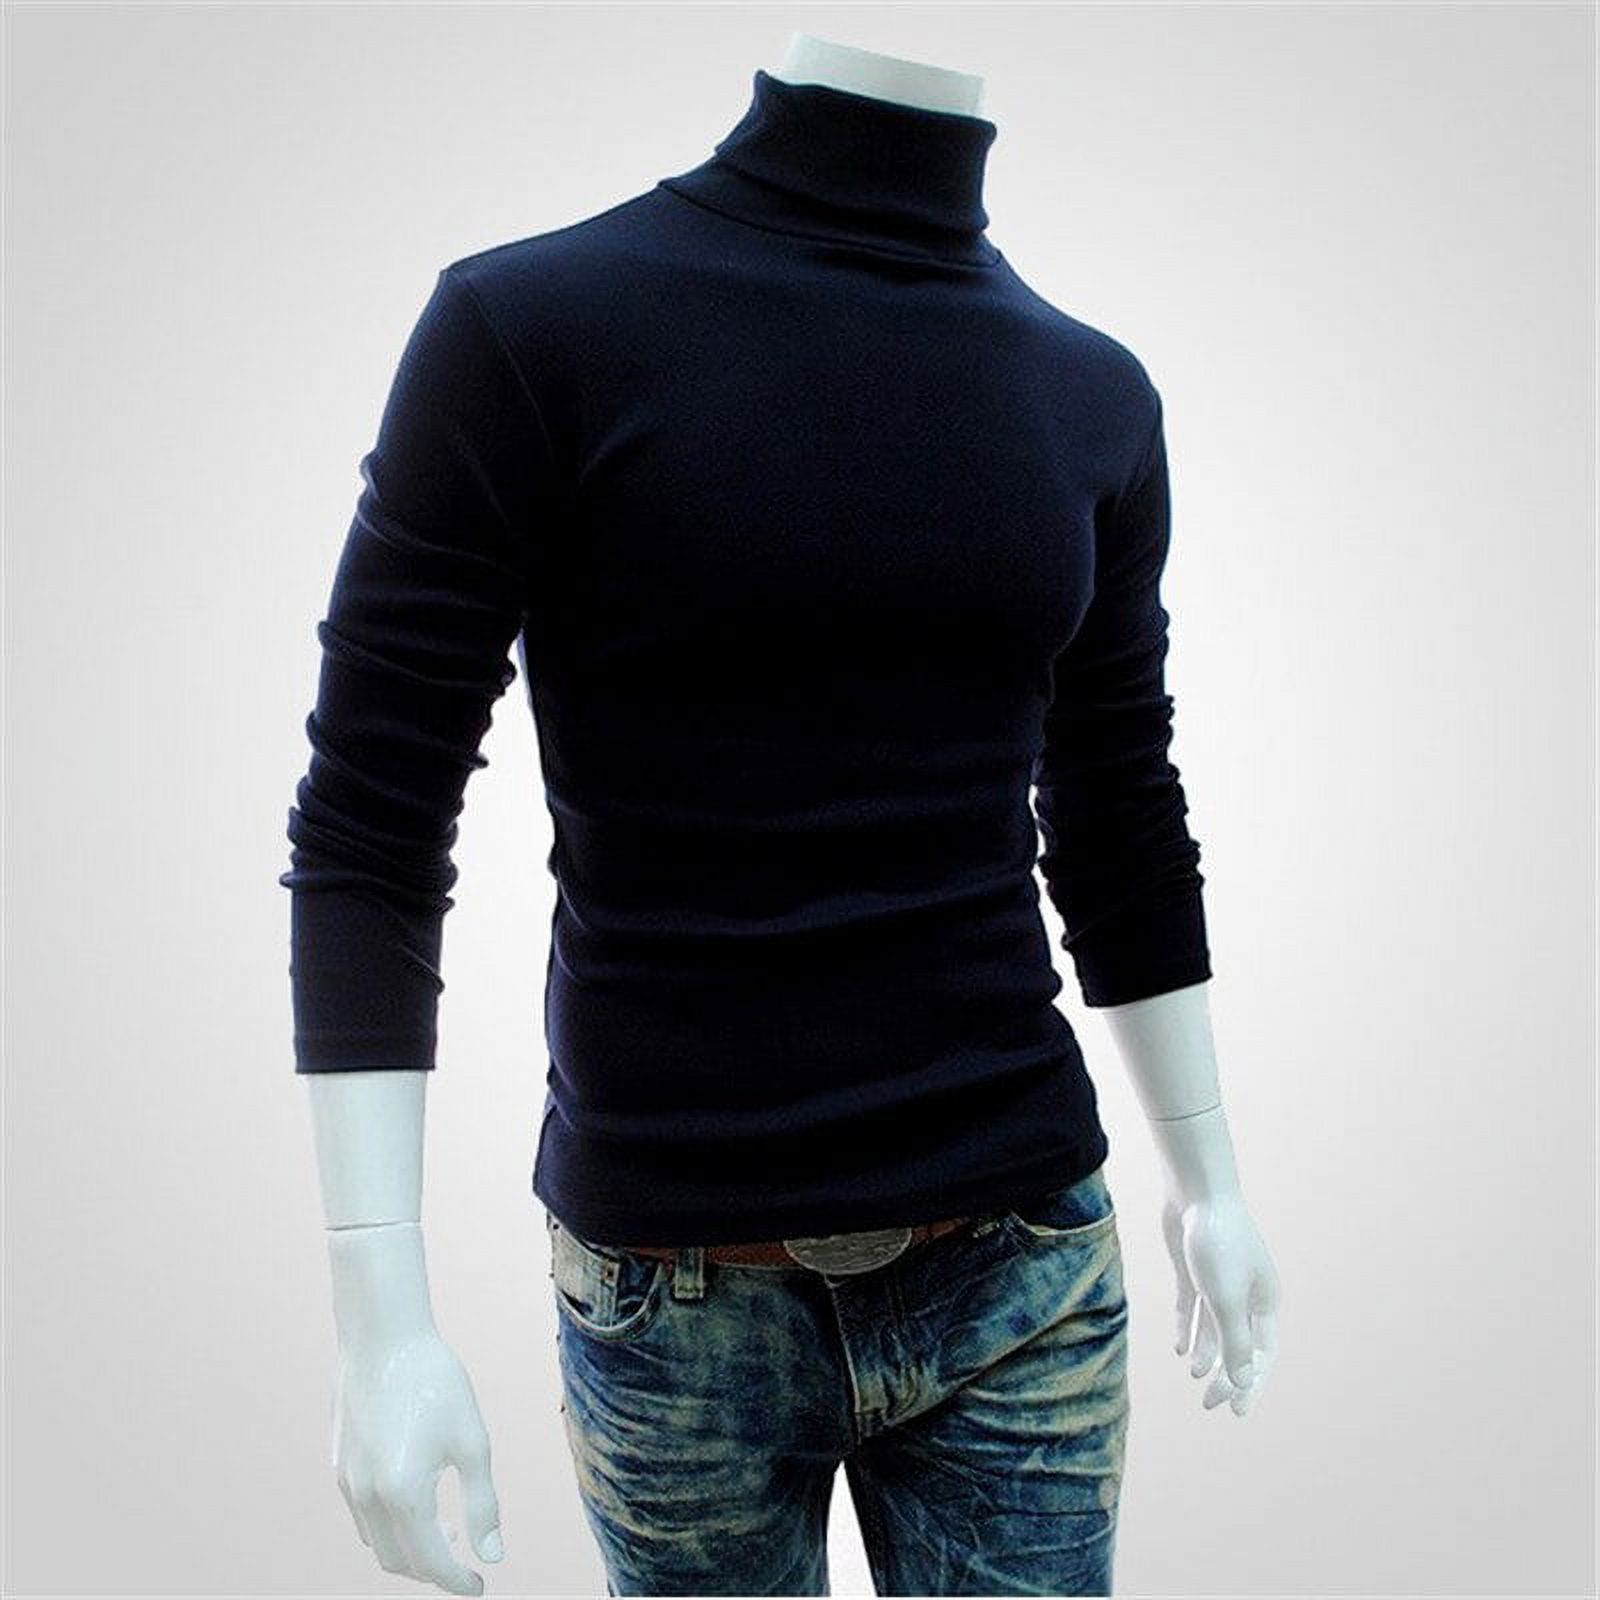 Seyurigaoka Fashion Mens Polo Roll Turtle Neck Pullover Knitted Jumper Tops Sweater Shirt - image 3 of 6